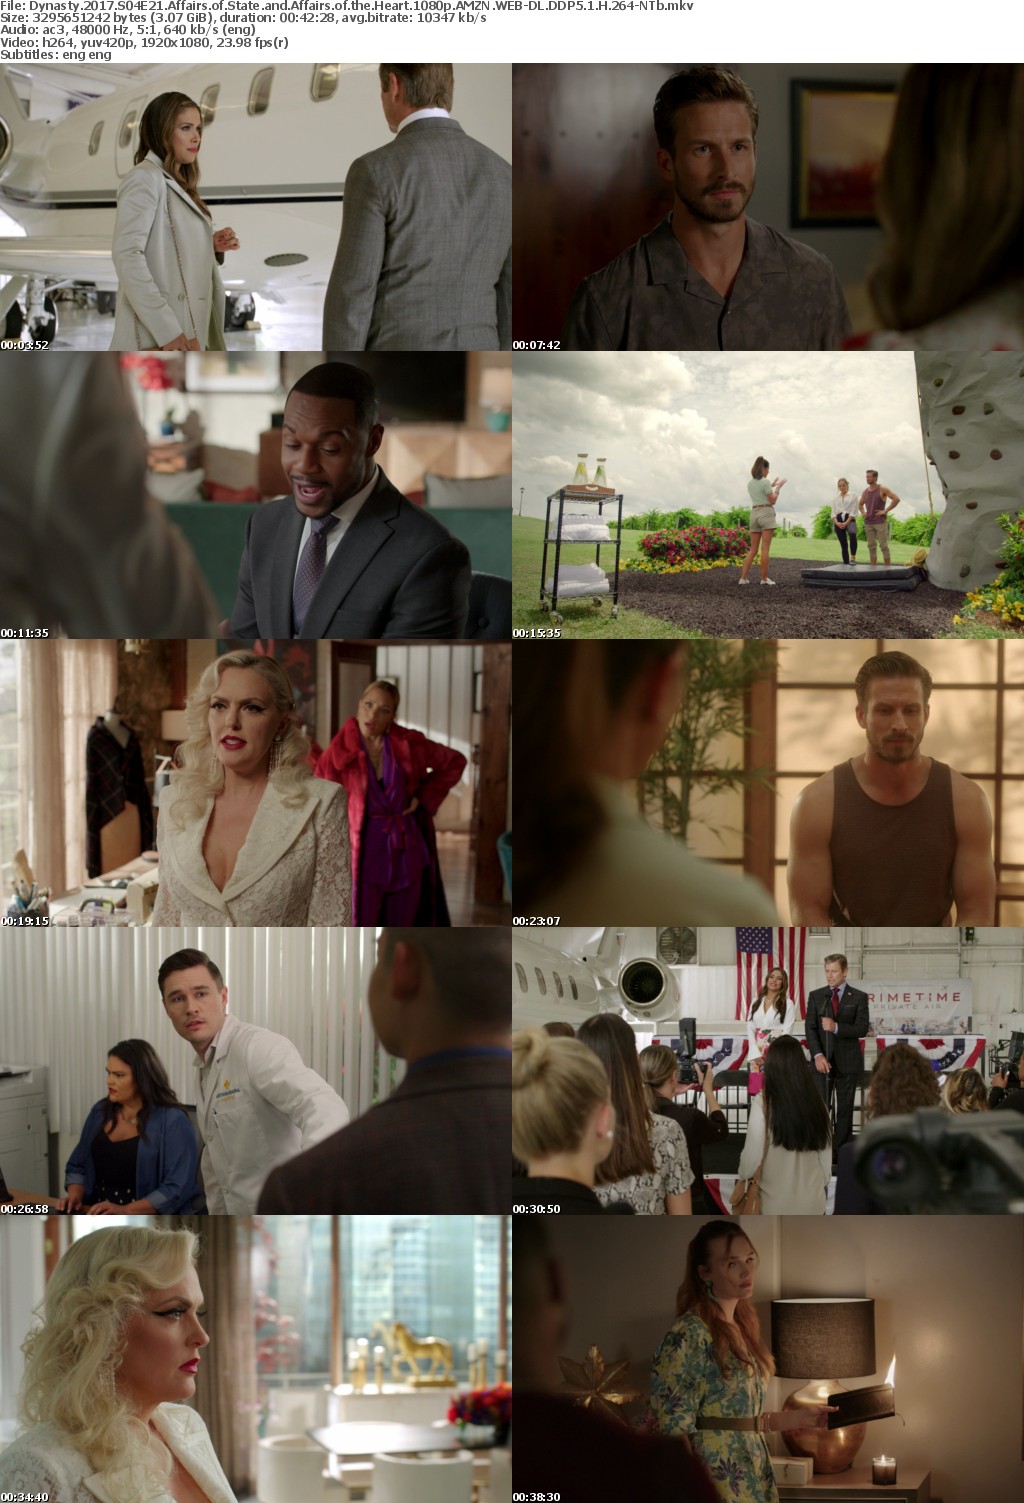 Dynasty 2017 S04E21 Affairs of State and Affairs of the Heart 1080p AMZN WEBRip DDP5 1 x264-NTb